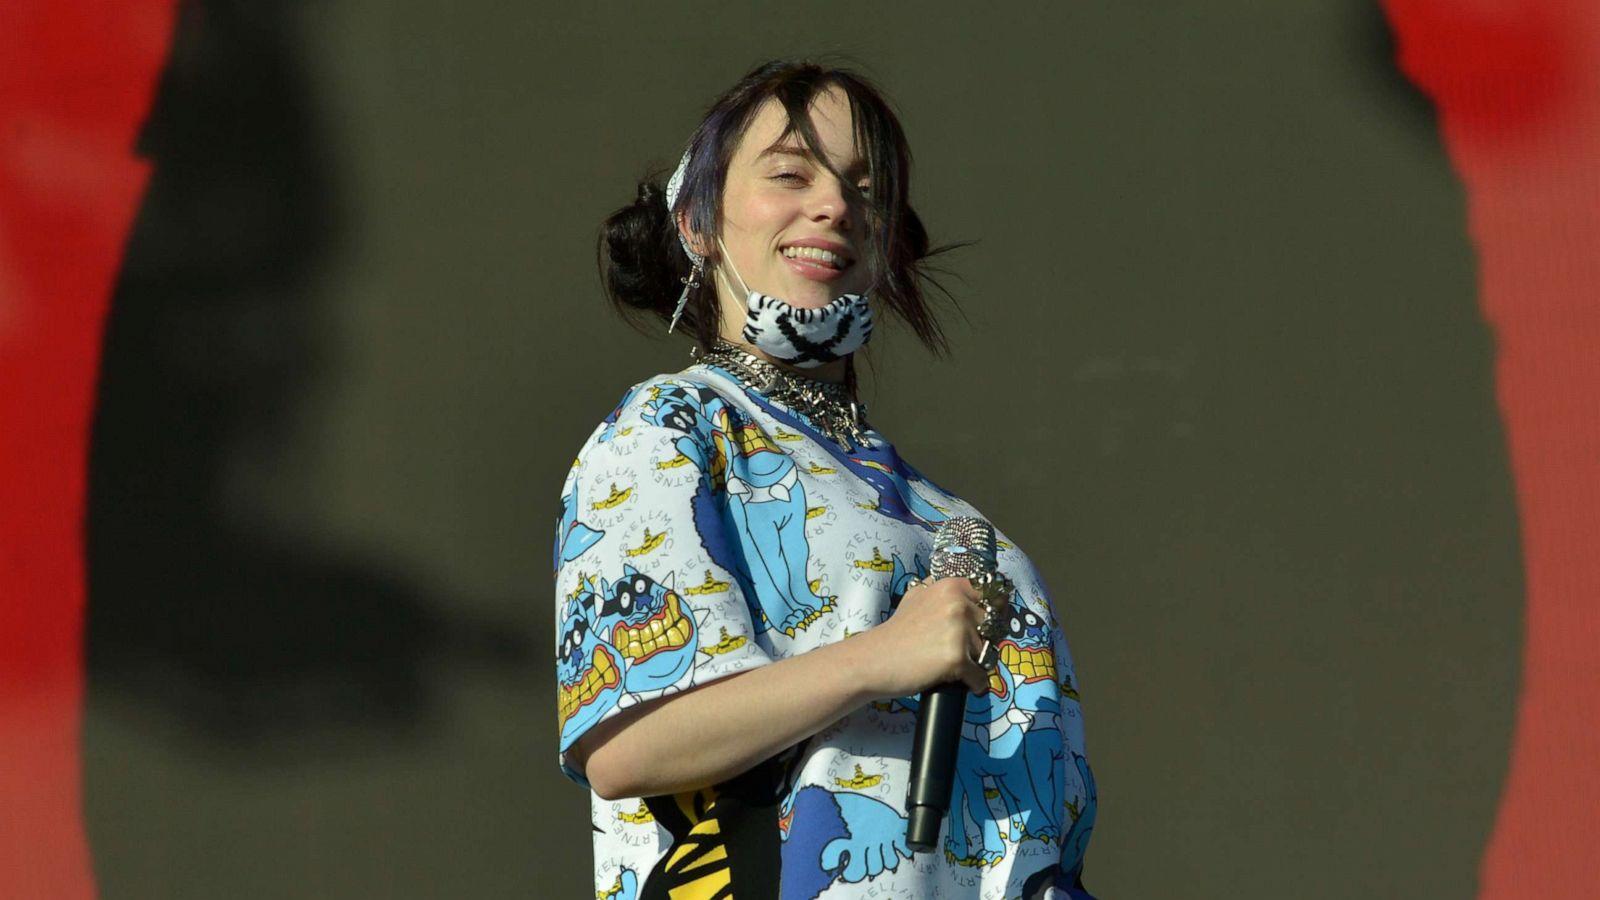 He can't ride no more: Billie Eilish's 'bad guy' finally knocks